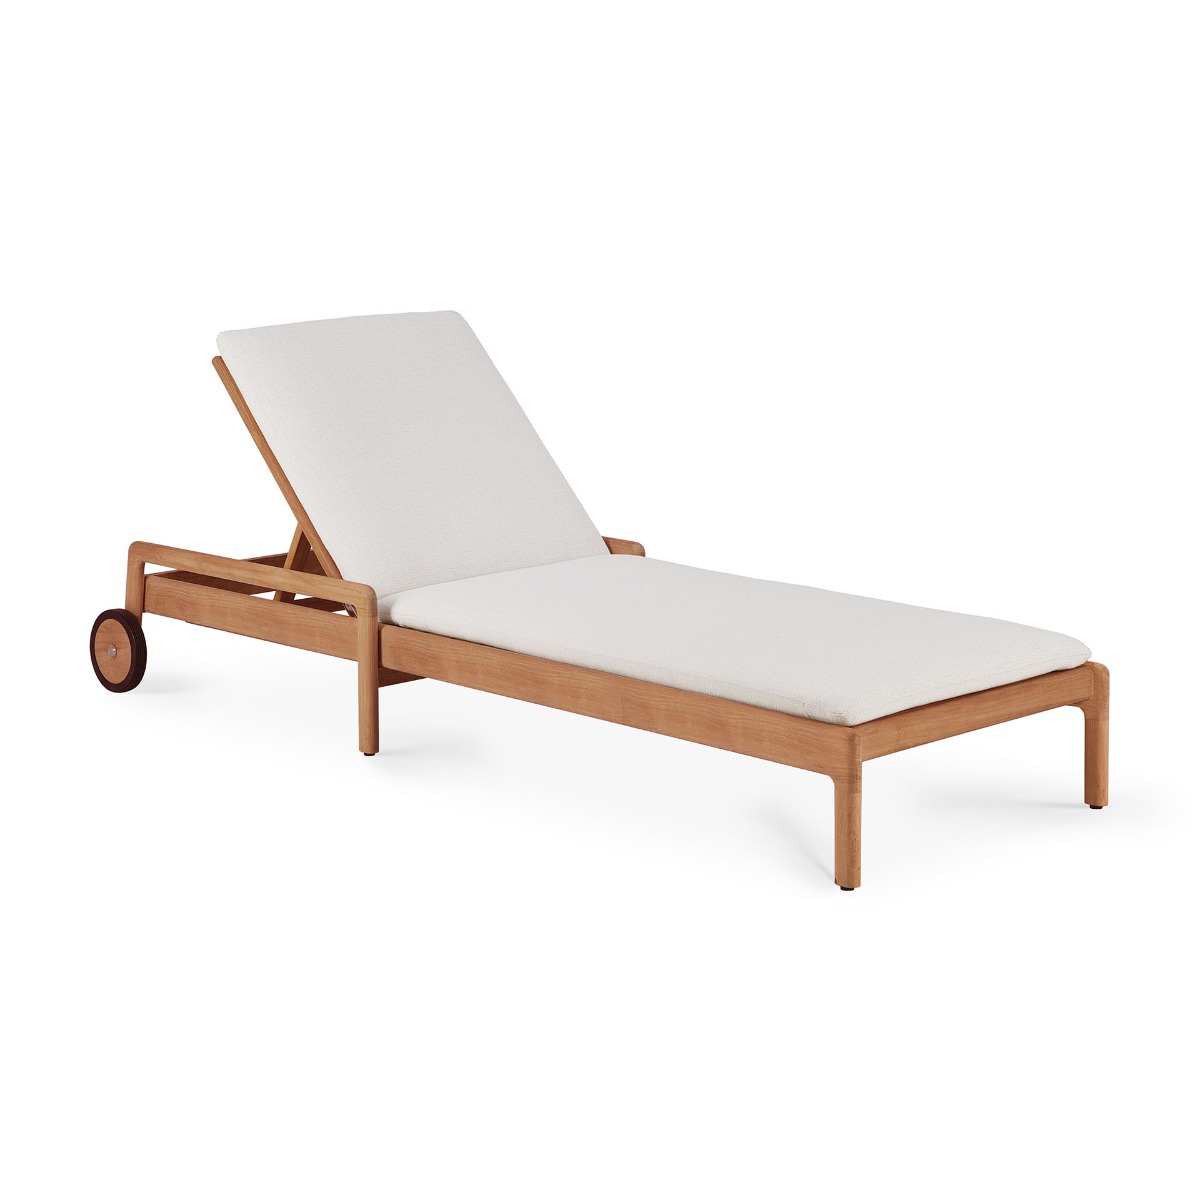 Jack outdoor adjustable lounger teak Off White fabric with thin cushion